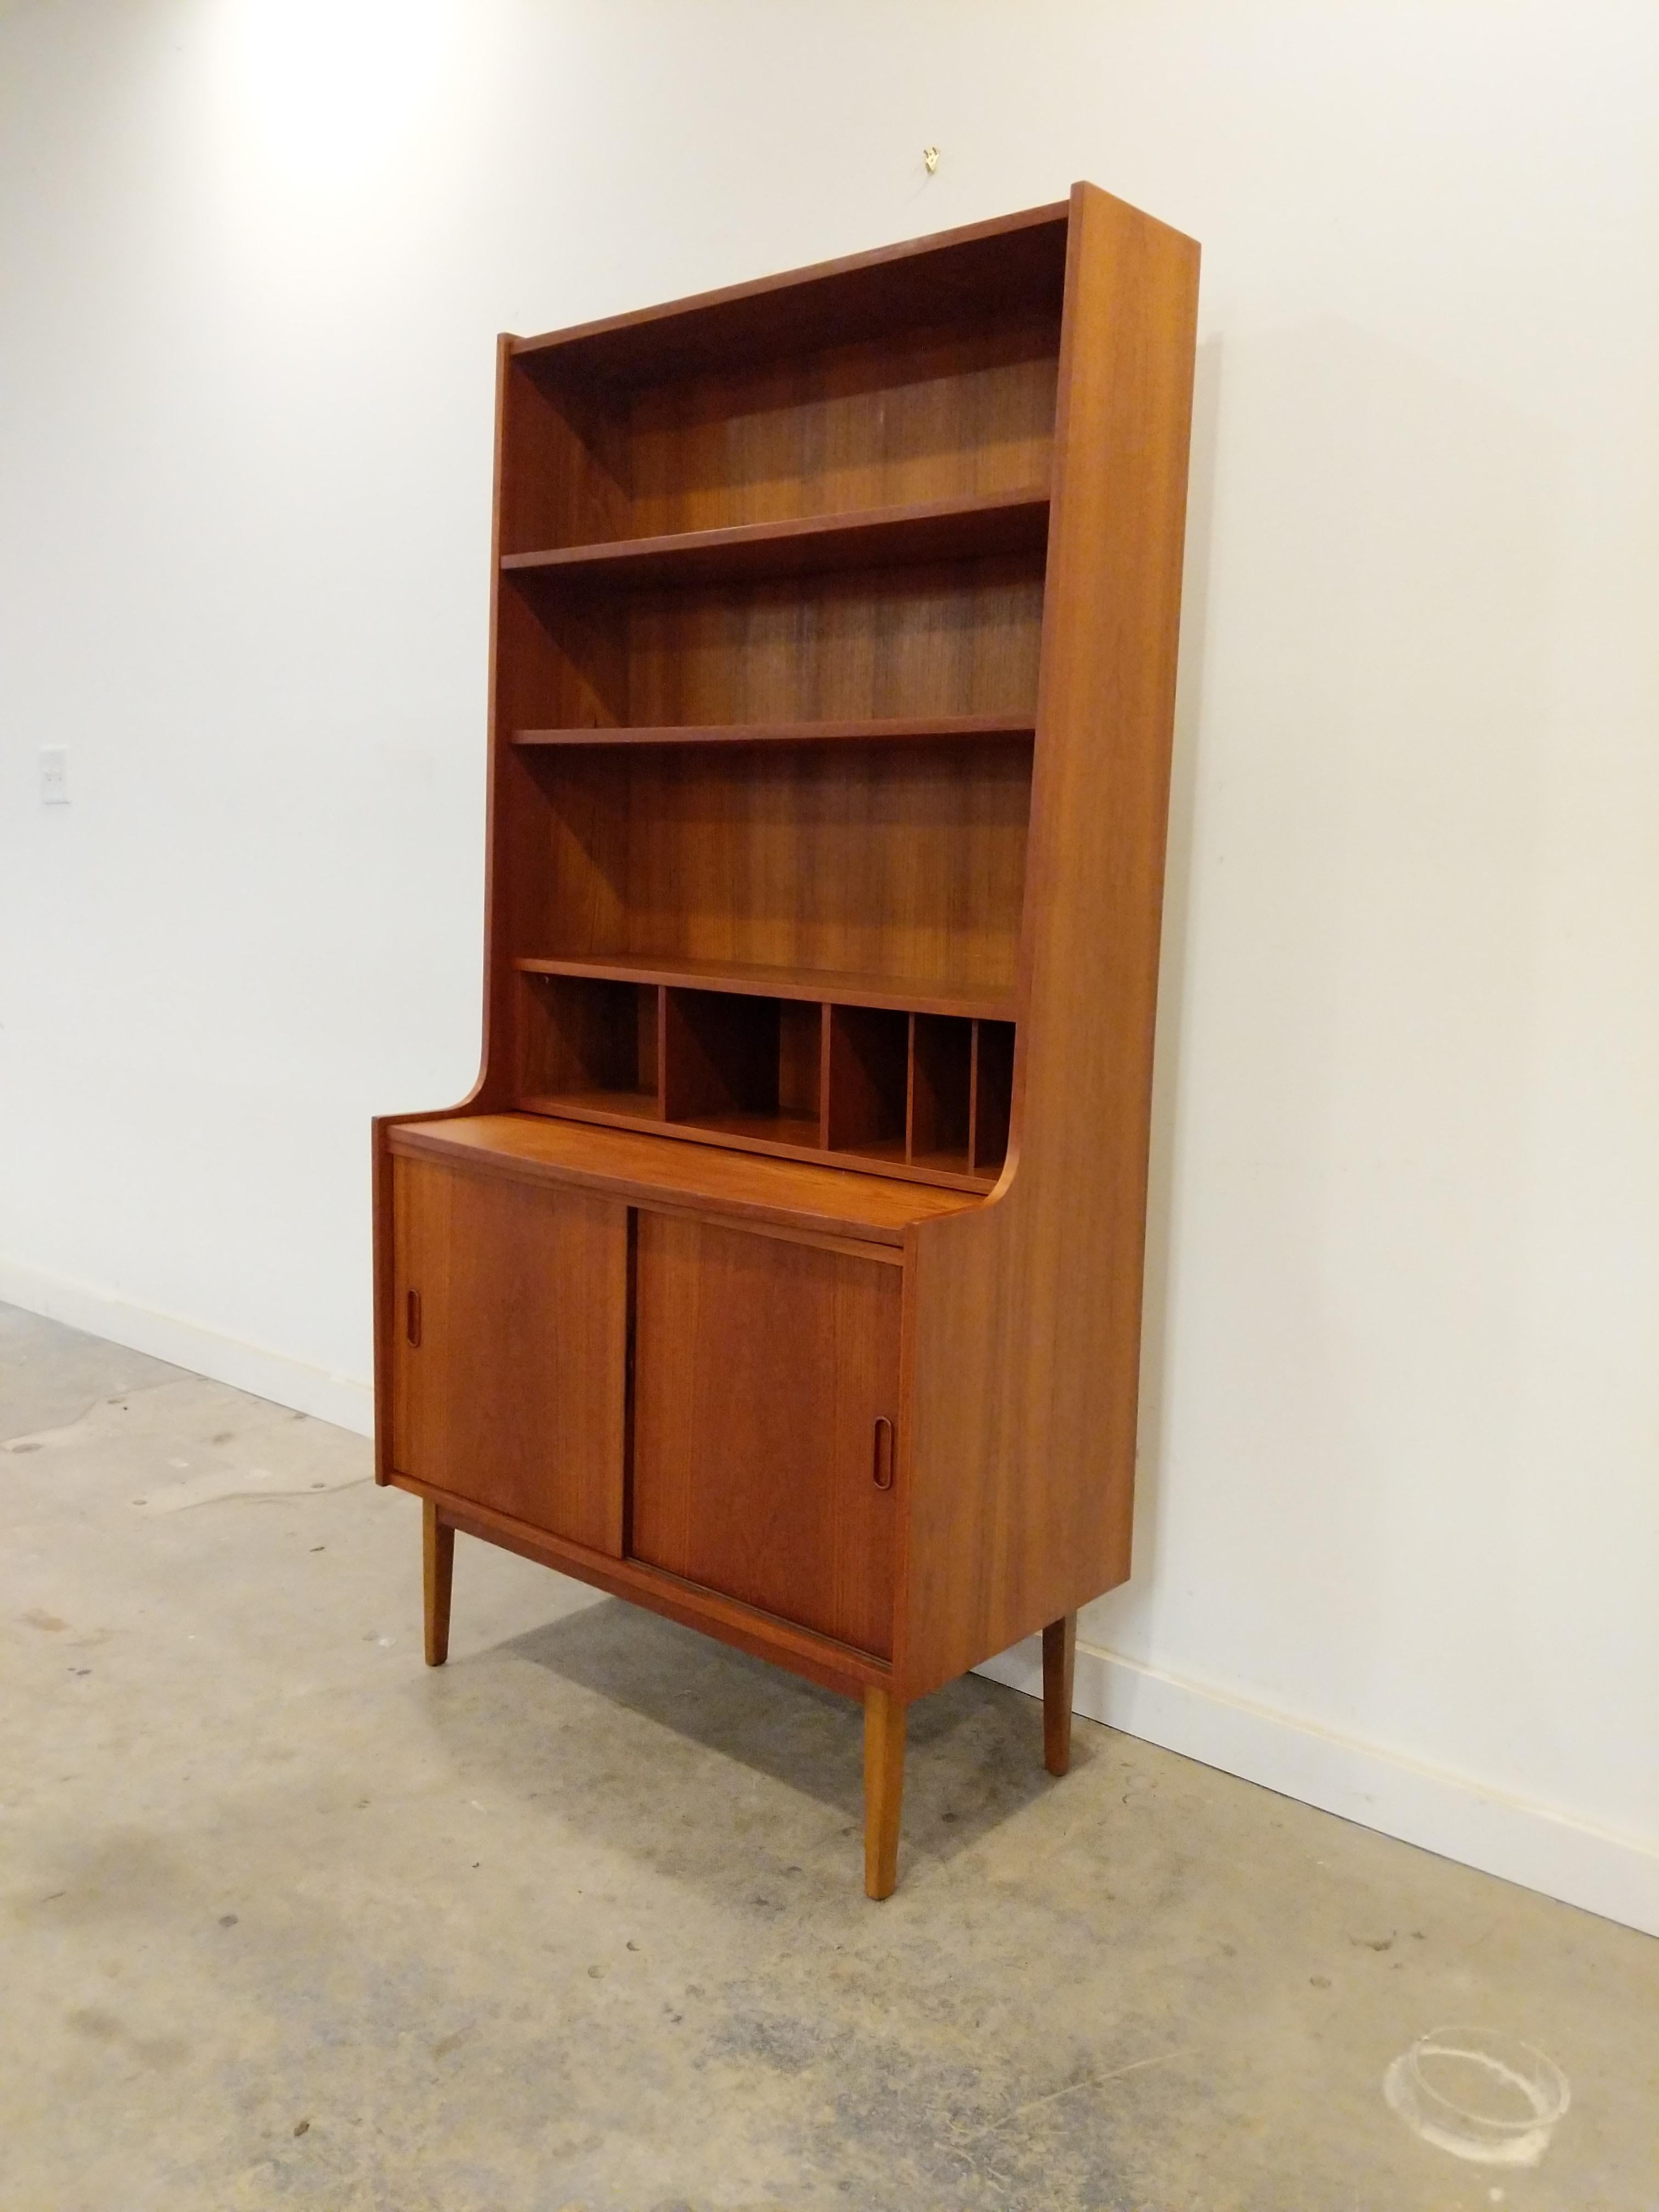 Authentic vintage mid century Danish / Scandinavian Modern teak bookshelf / secretary desk / cabinet.

This piece is in excellent refinished condition with very few signs of age-related wear (see photos).

If you would like any additional details,